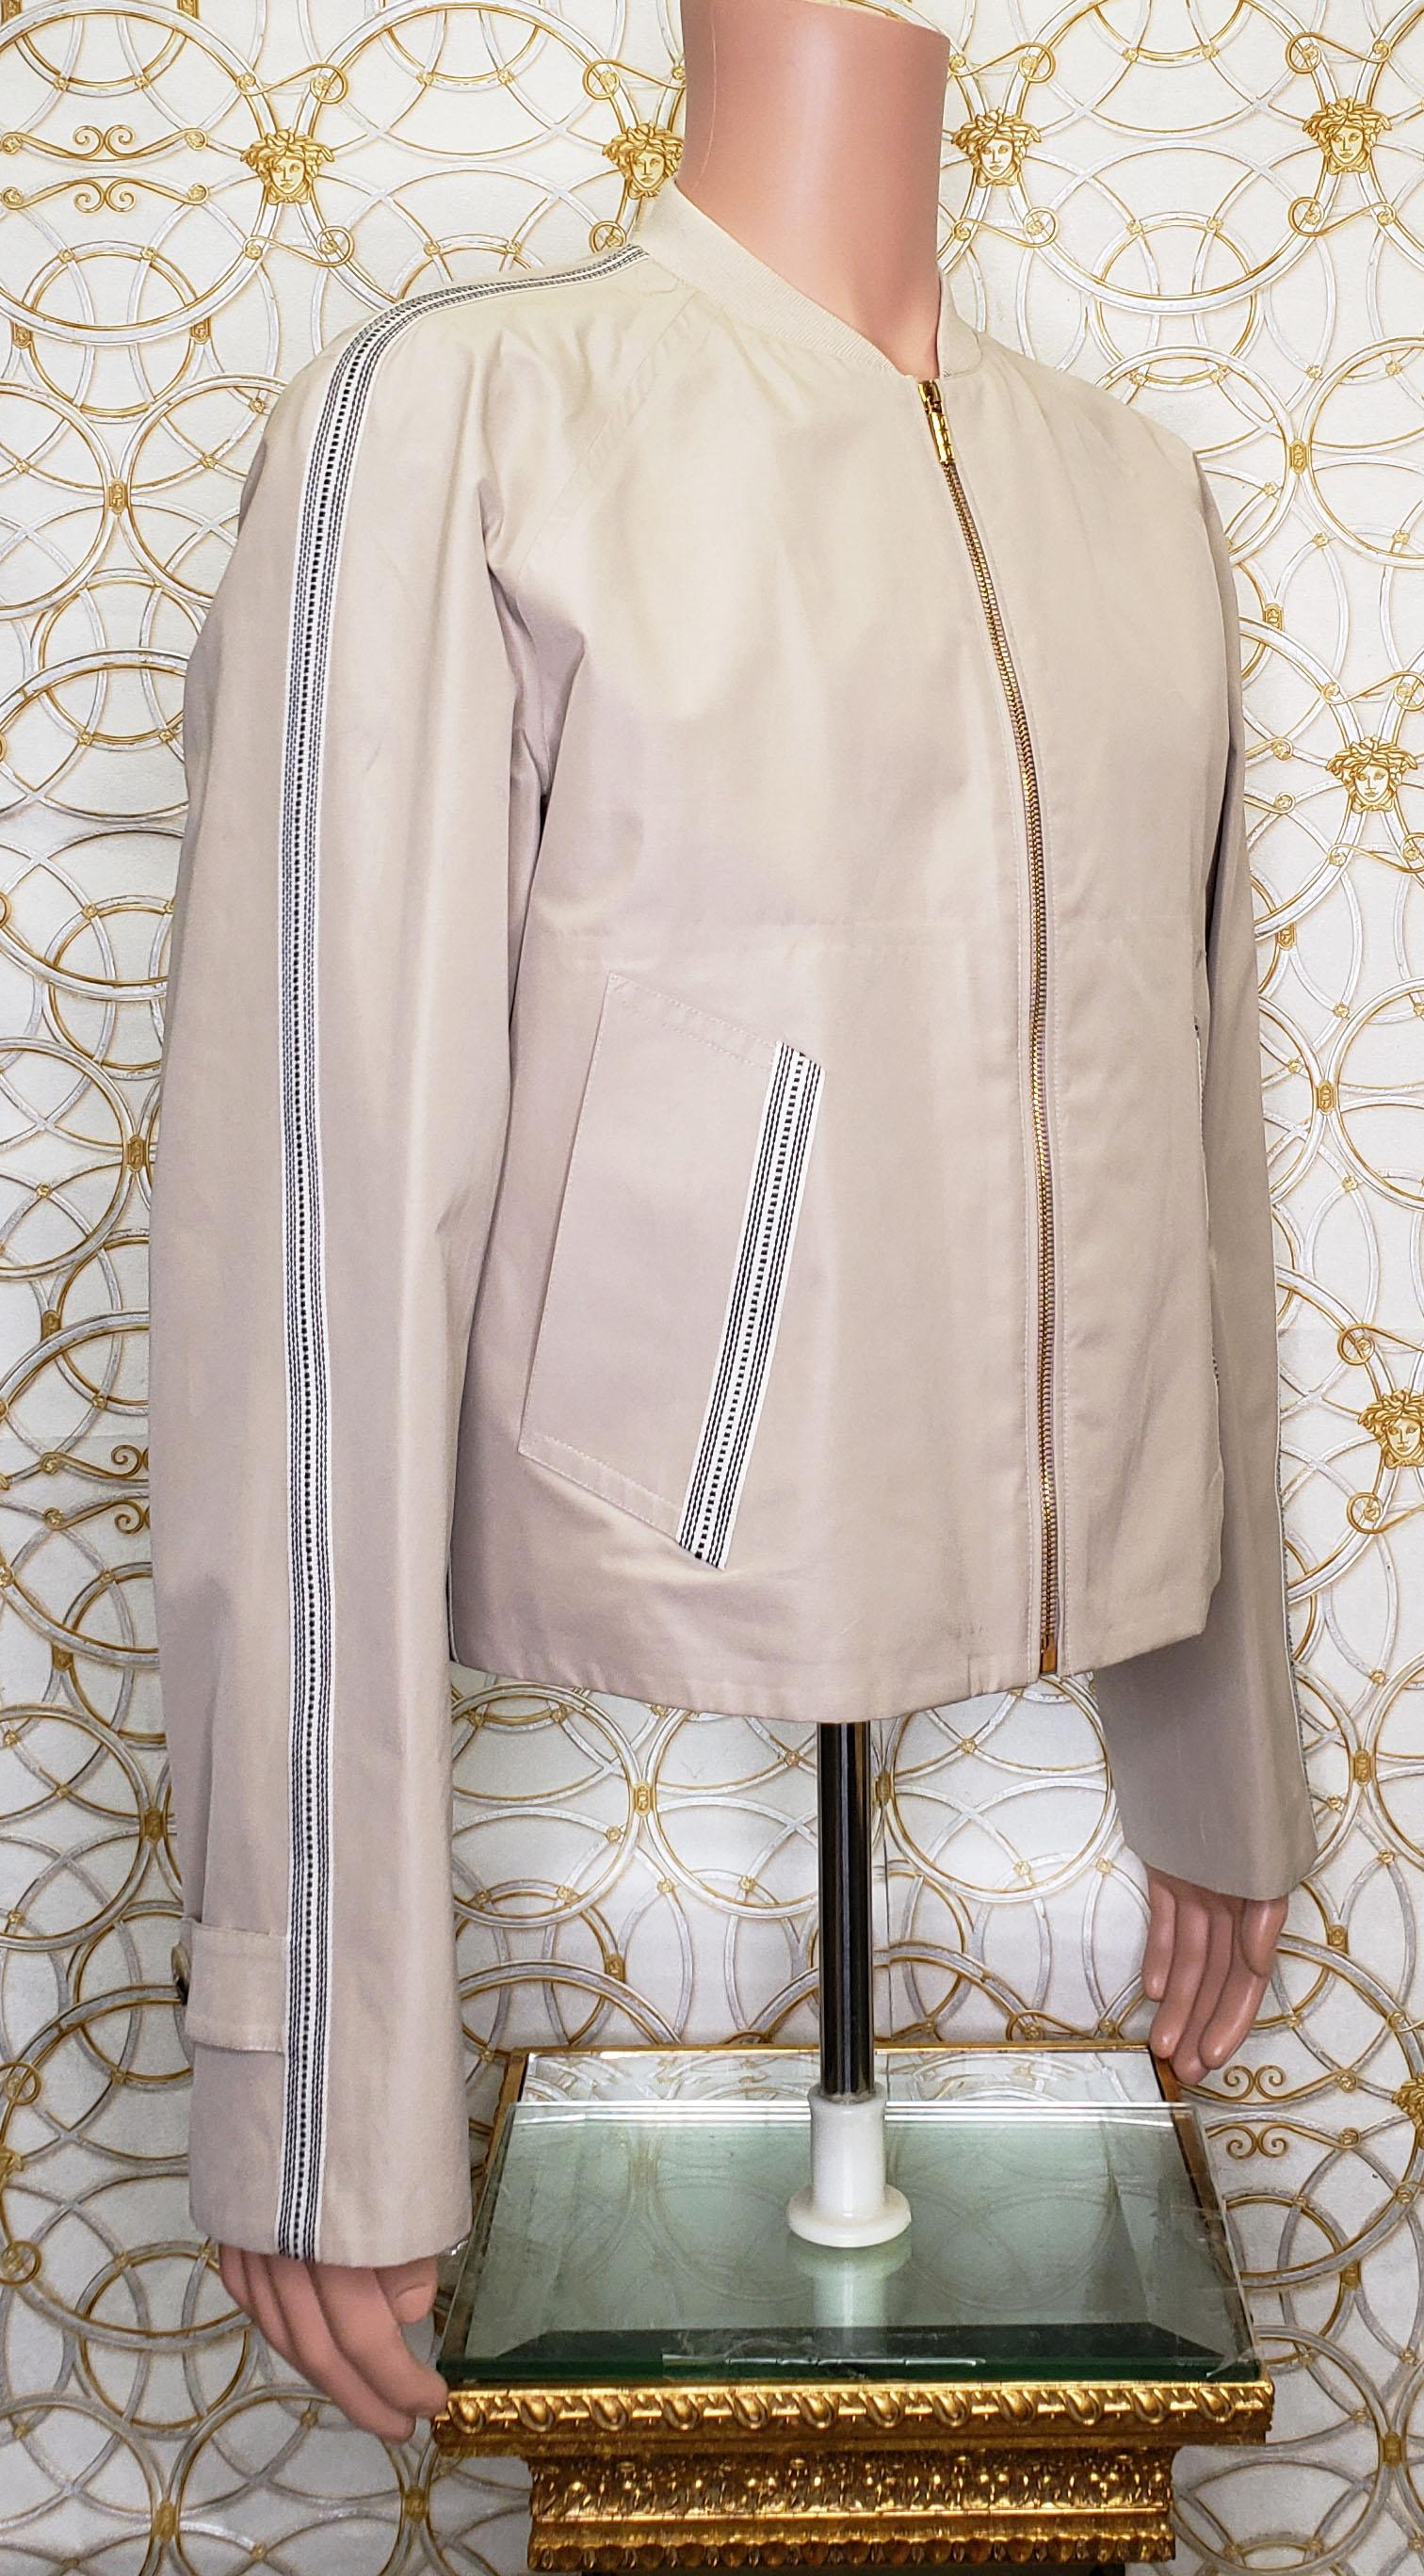 S/S 2016 L#17 NEW VERSACE BEIGE BOMBER JACKET with ZIPPER CLOSURE 50 - 40 For Sale 3